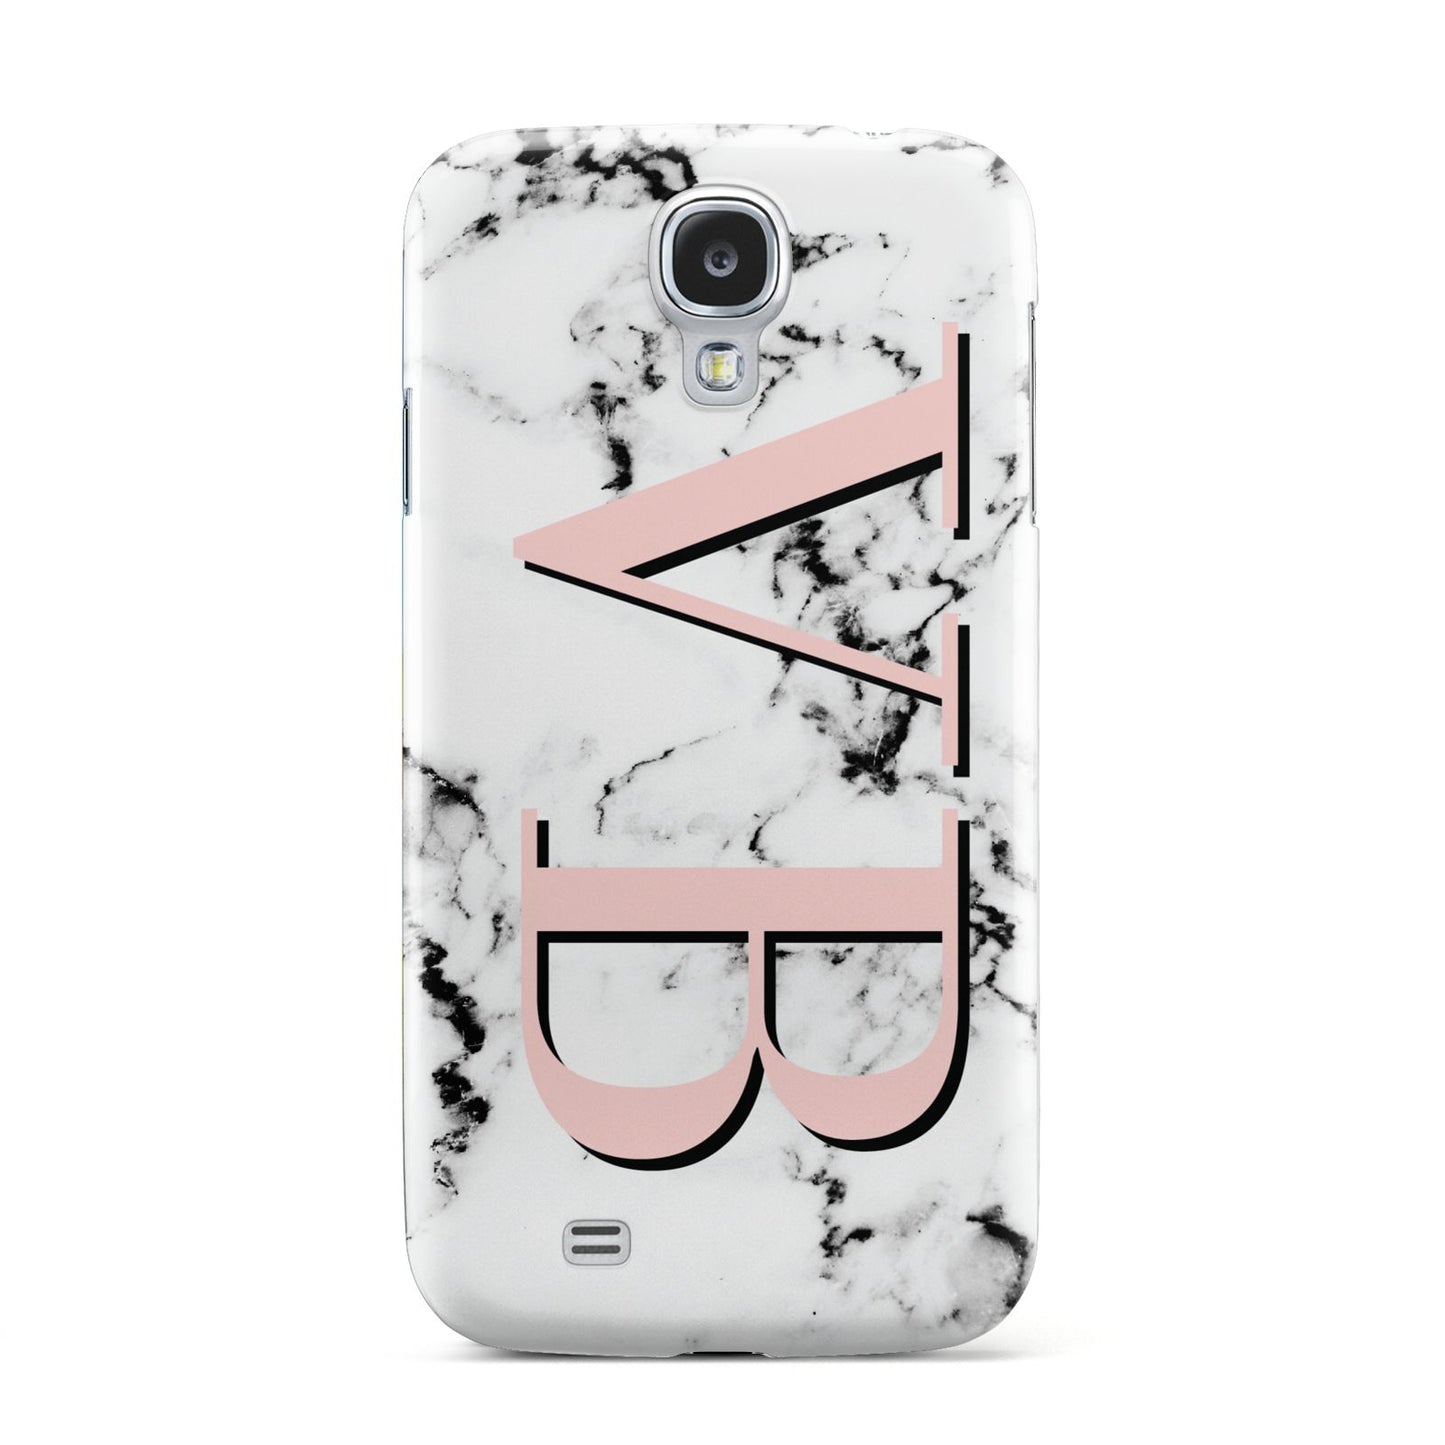 Personalised Coral Malble Initials Samsung Galaxy S4 Case